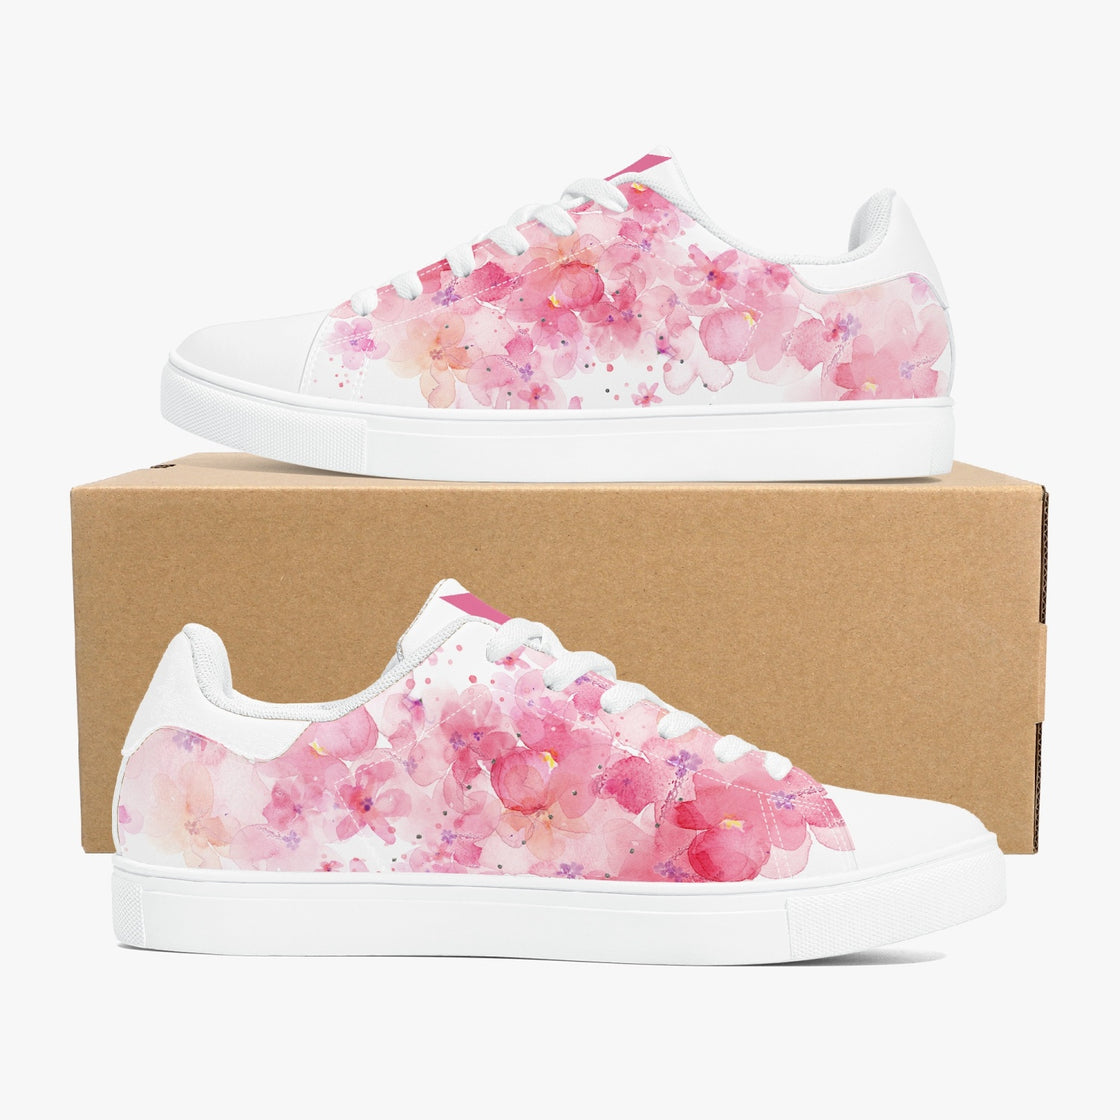 Classic Floral Design BTS ARMY Sneaker Shoes